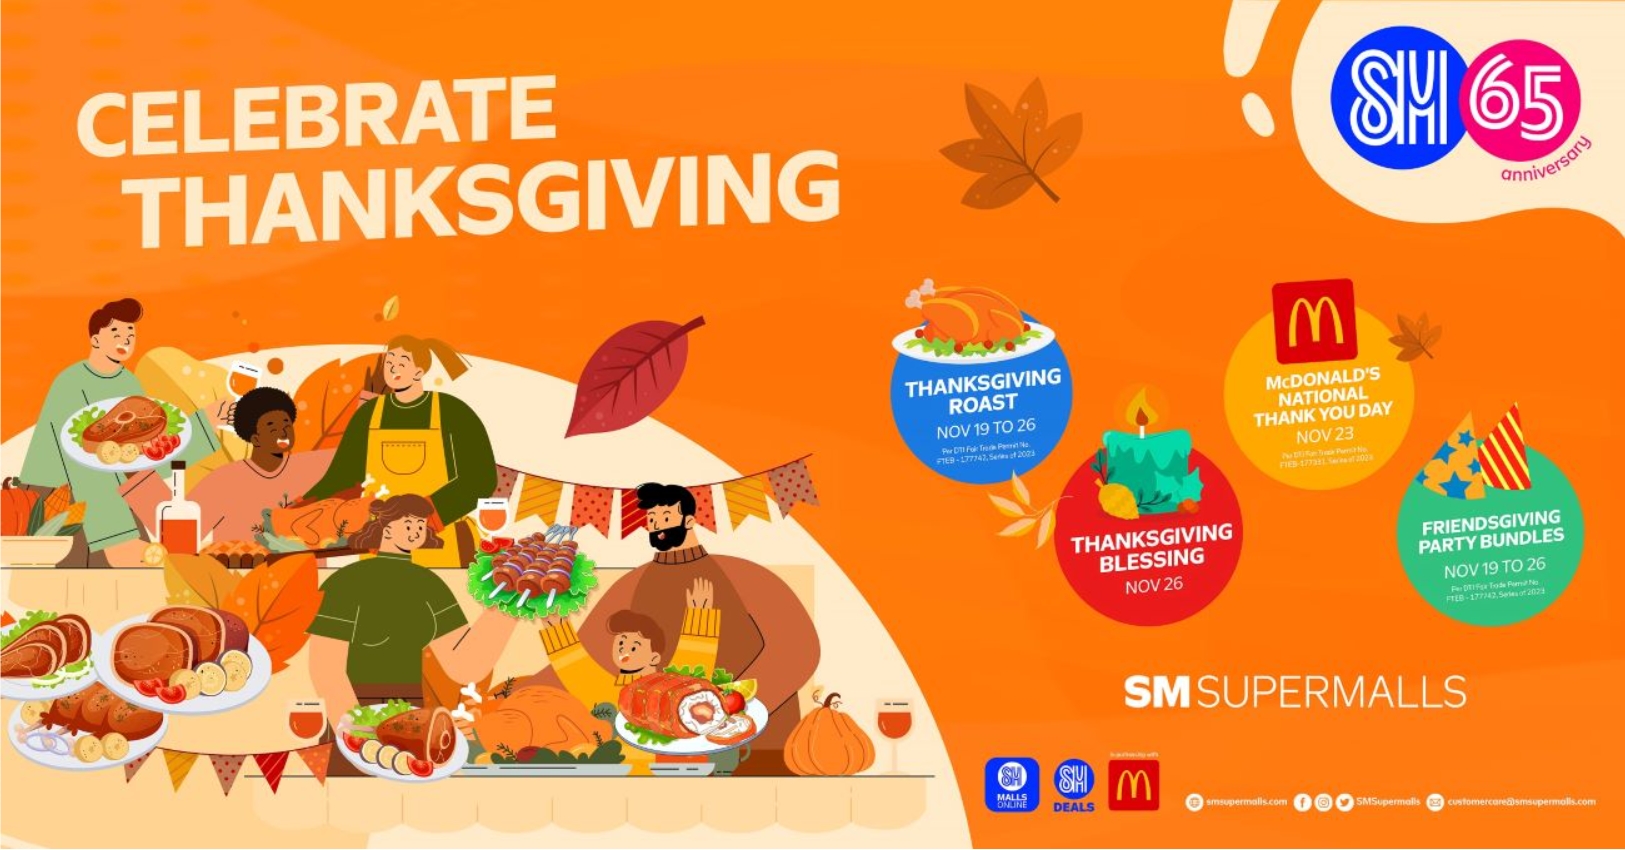 Experience an #AweSM Thanksgiving Celebration at SM Supermalls